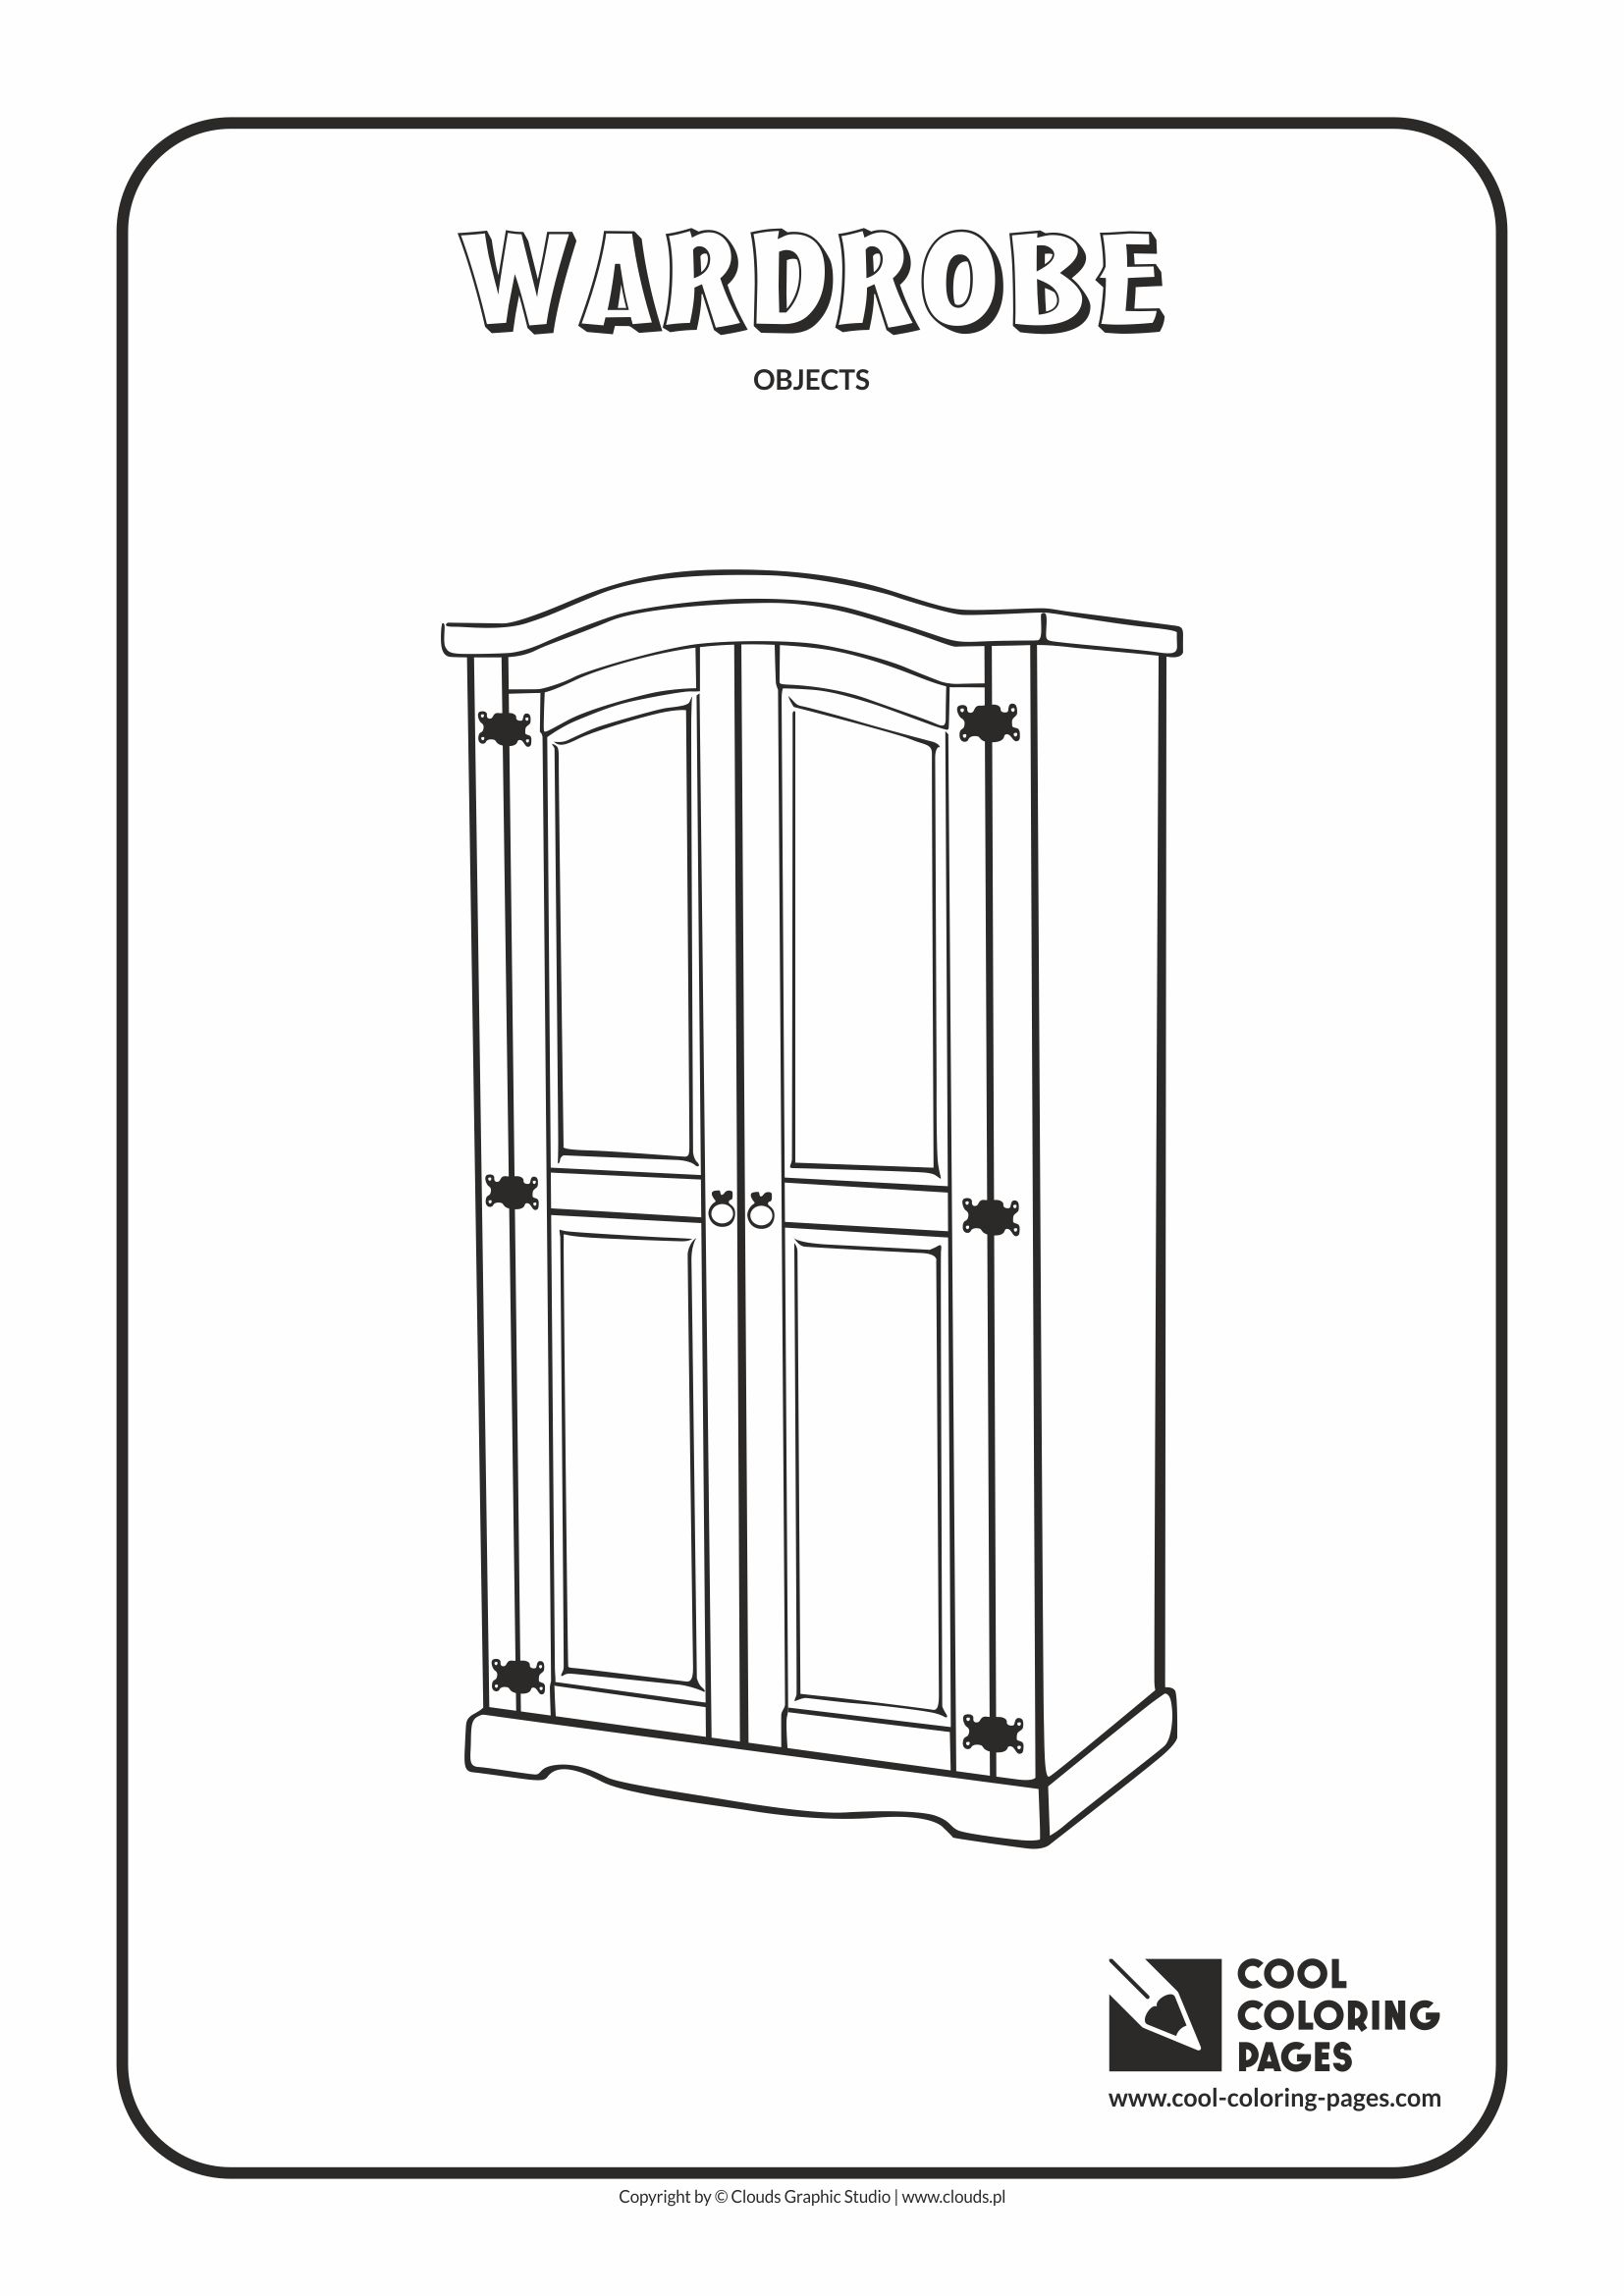 Cool Coloring Pages - Coloring objects / Wardrobe